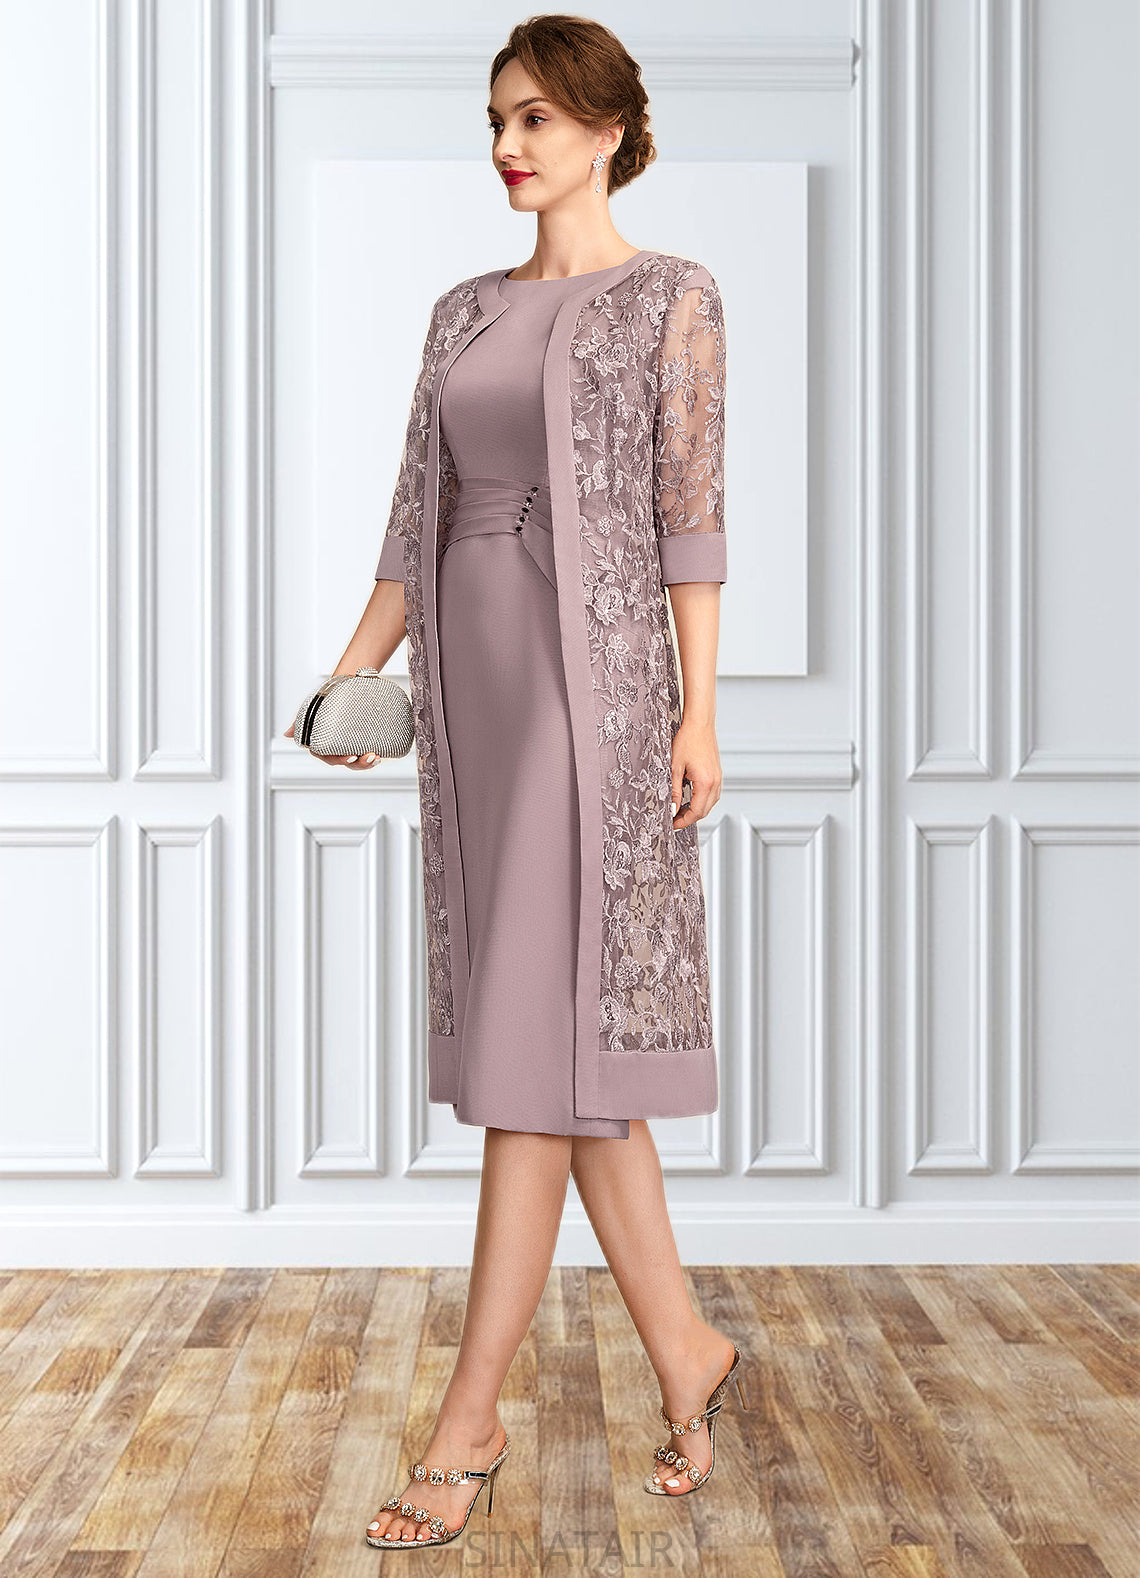 Shyanne Sheath/Column Scoop Neck Knee-Length Chiffon Mother of the Bride Dress With Ruffle Sequins DH126P0015023